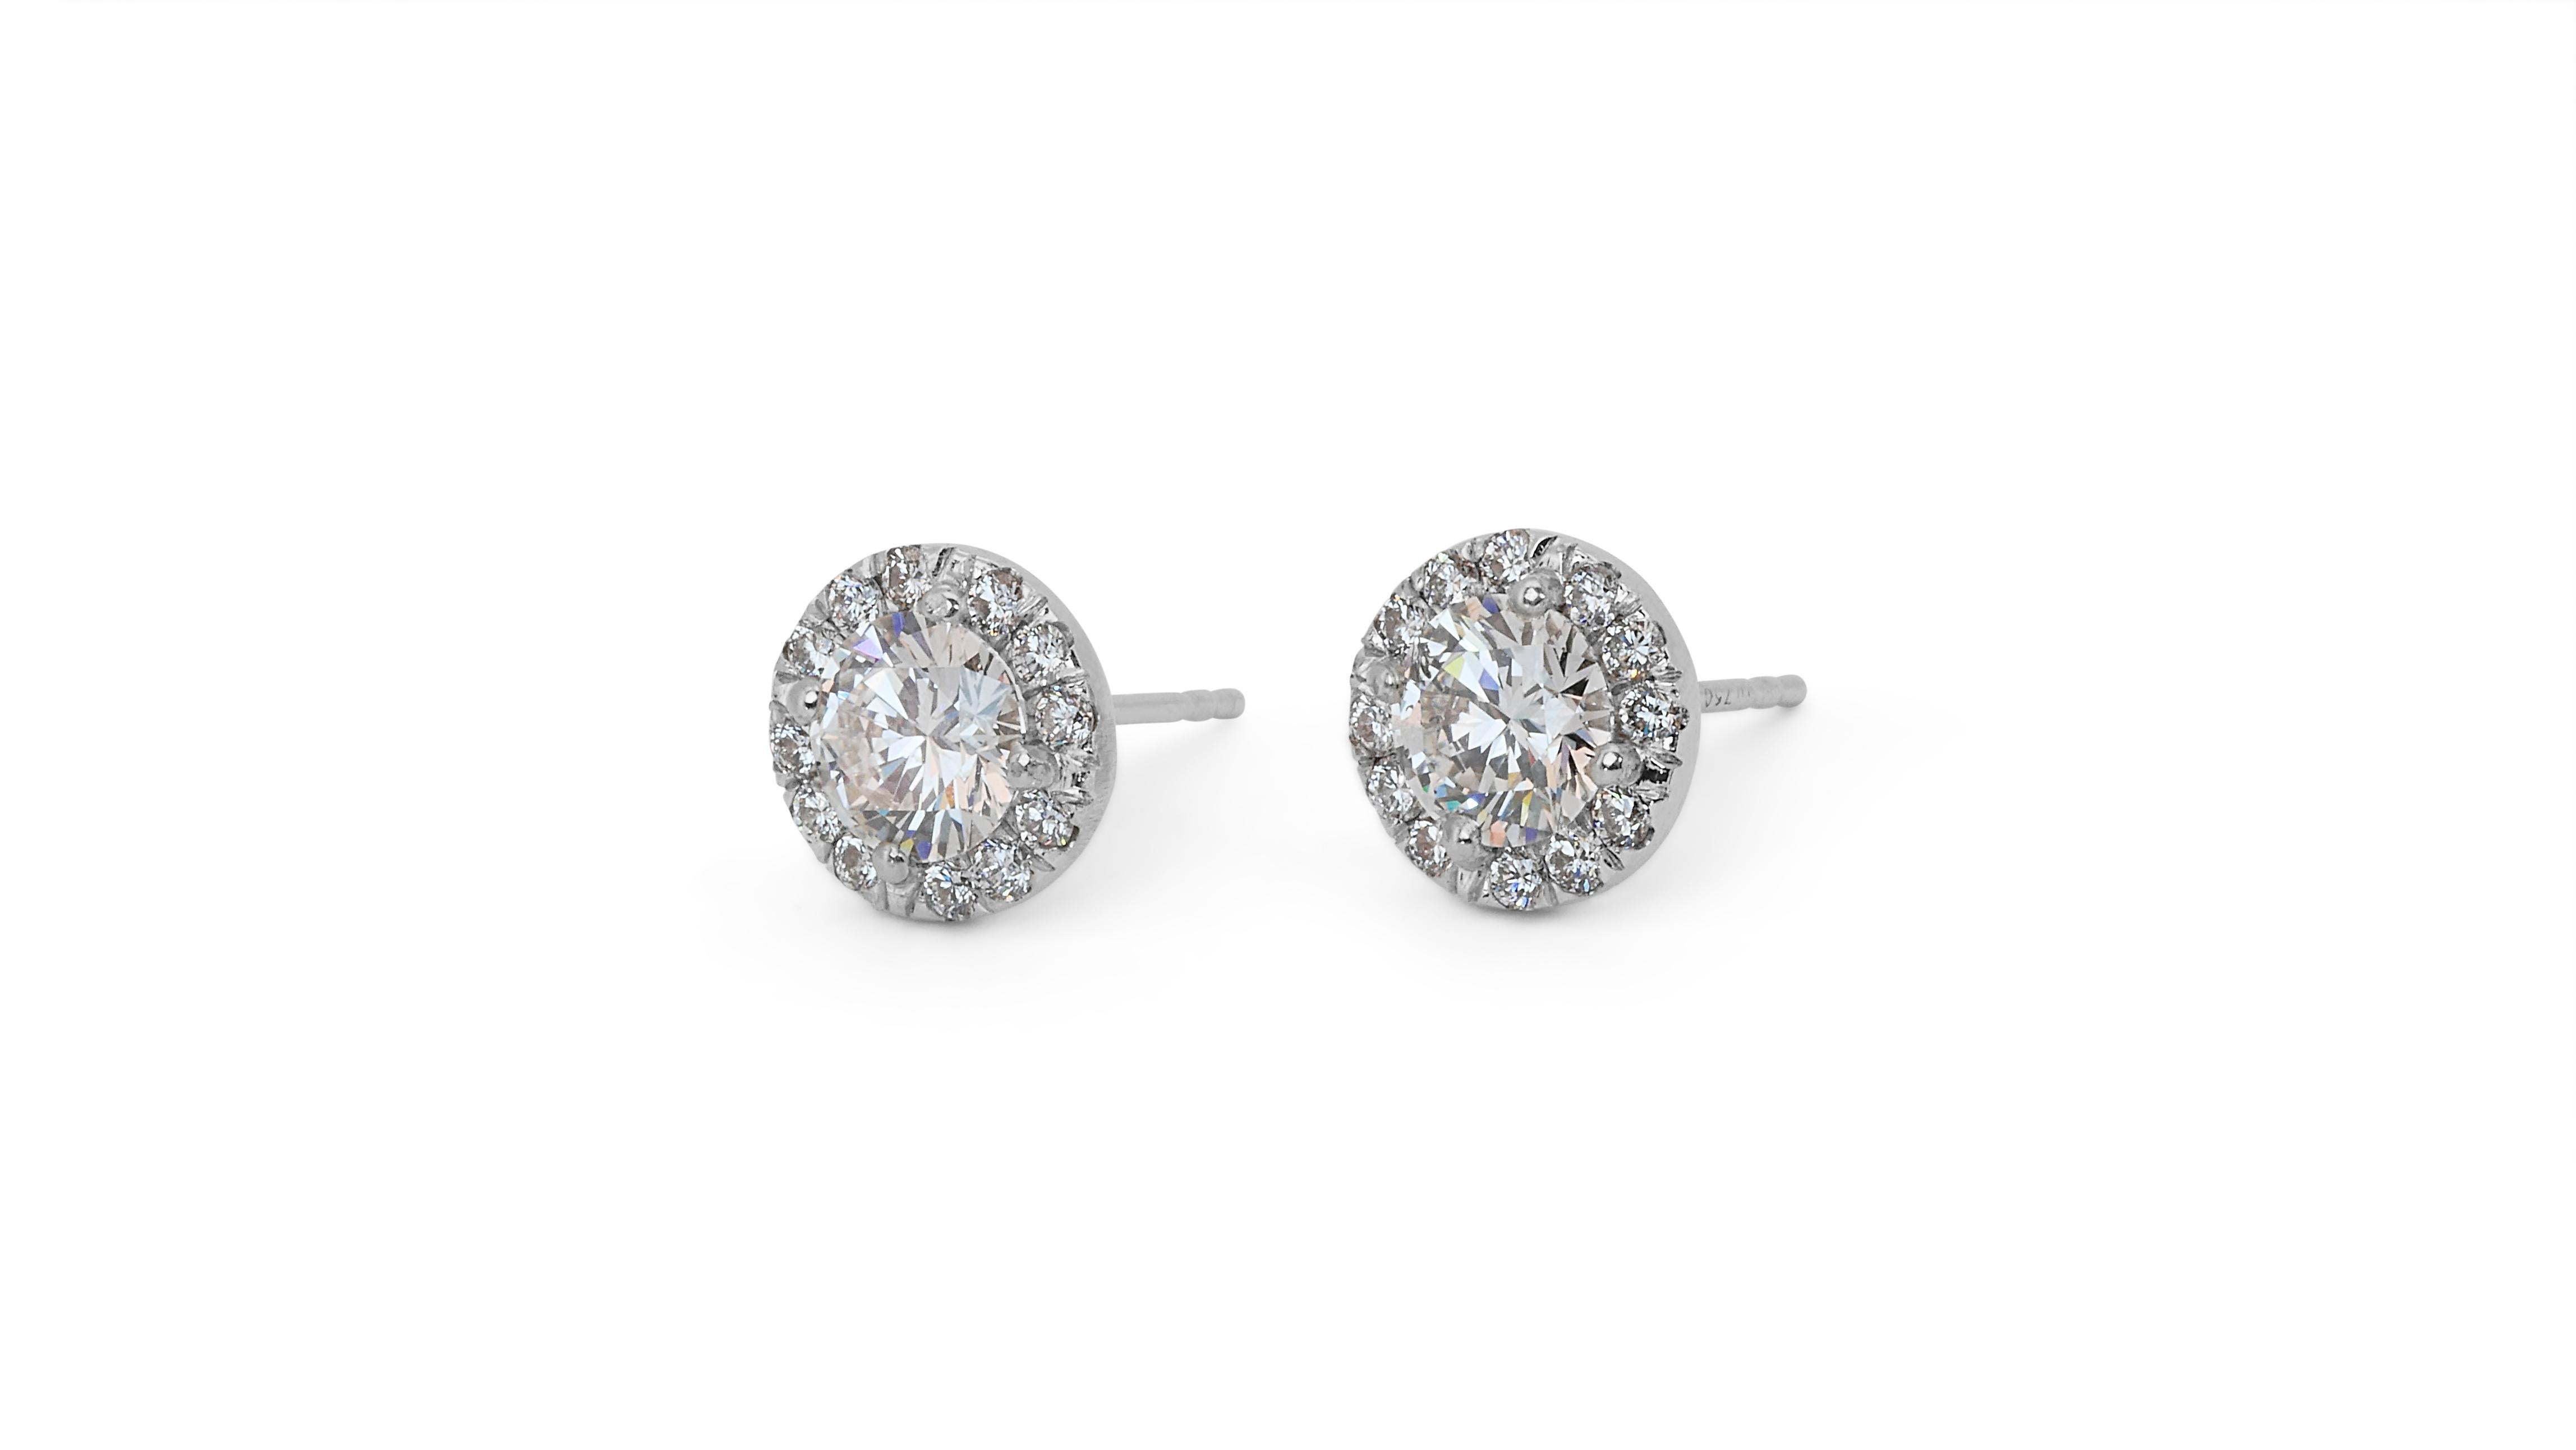 Round Cut Fascinating 2.55ct Diamond Halo Earrings in 18k White Gold - GIA Certified For Sale